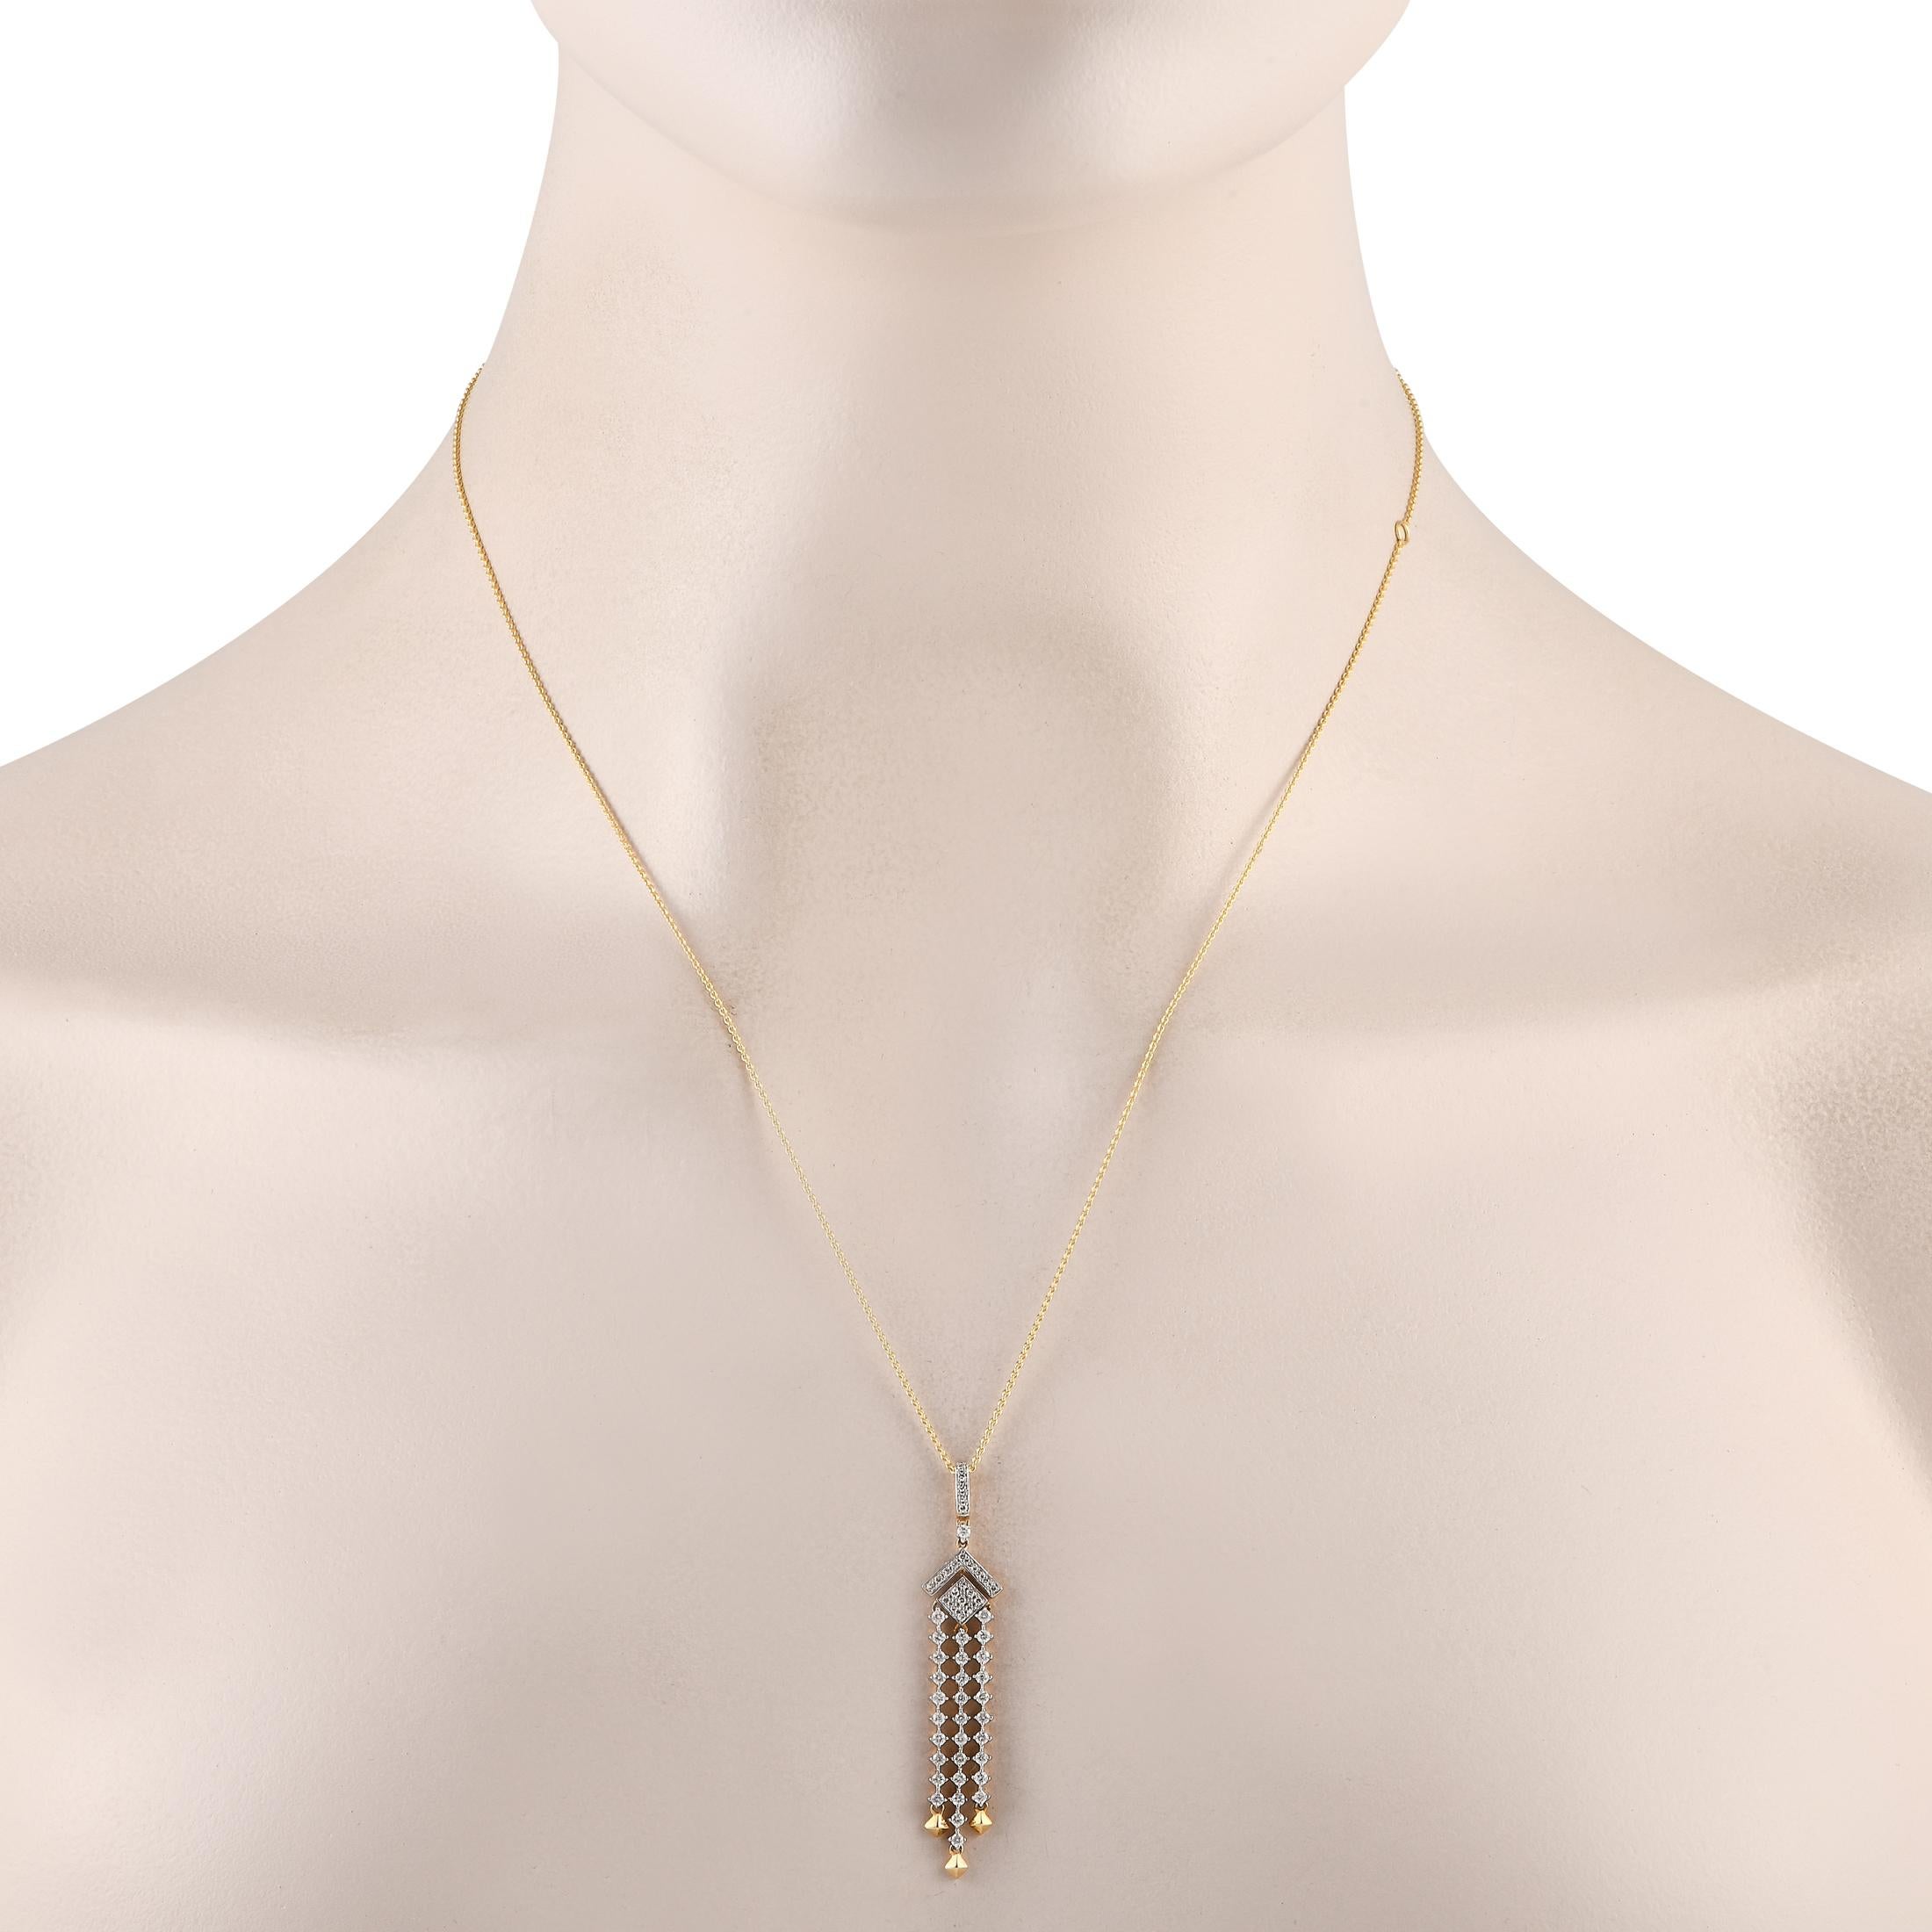 Simple yet powerfully elegant, this diamond necklace will instantly add a stunning sparkle to any look. It features three strands of round diamonds suspending from a rhombus bezel with a cluster of round diamonds. Each strand ends with a golden